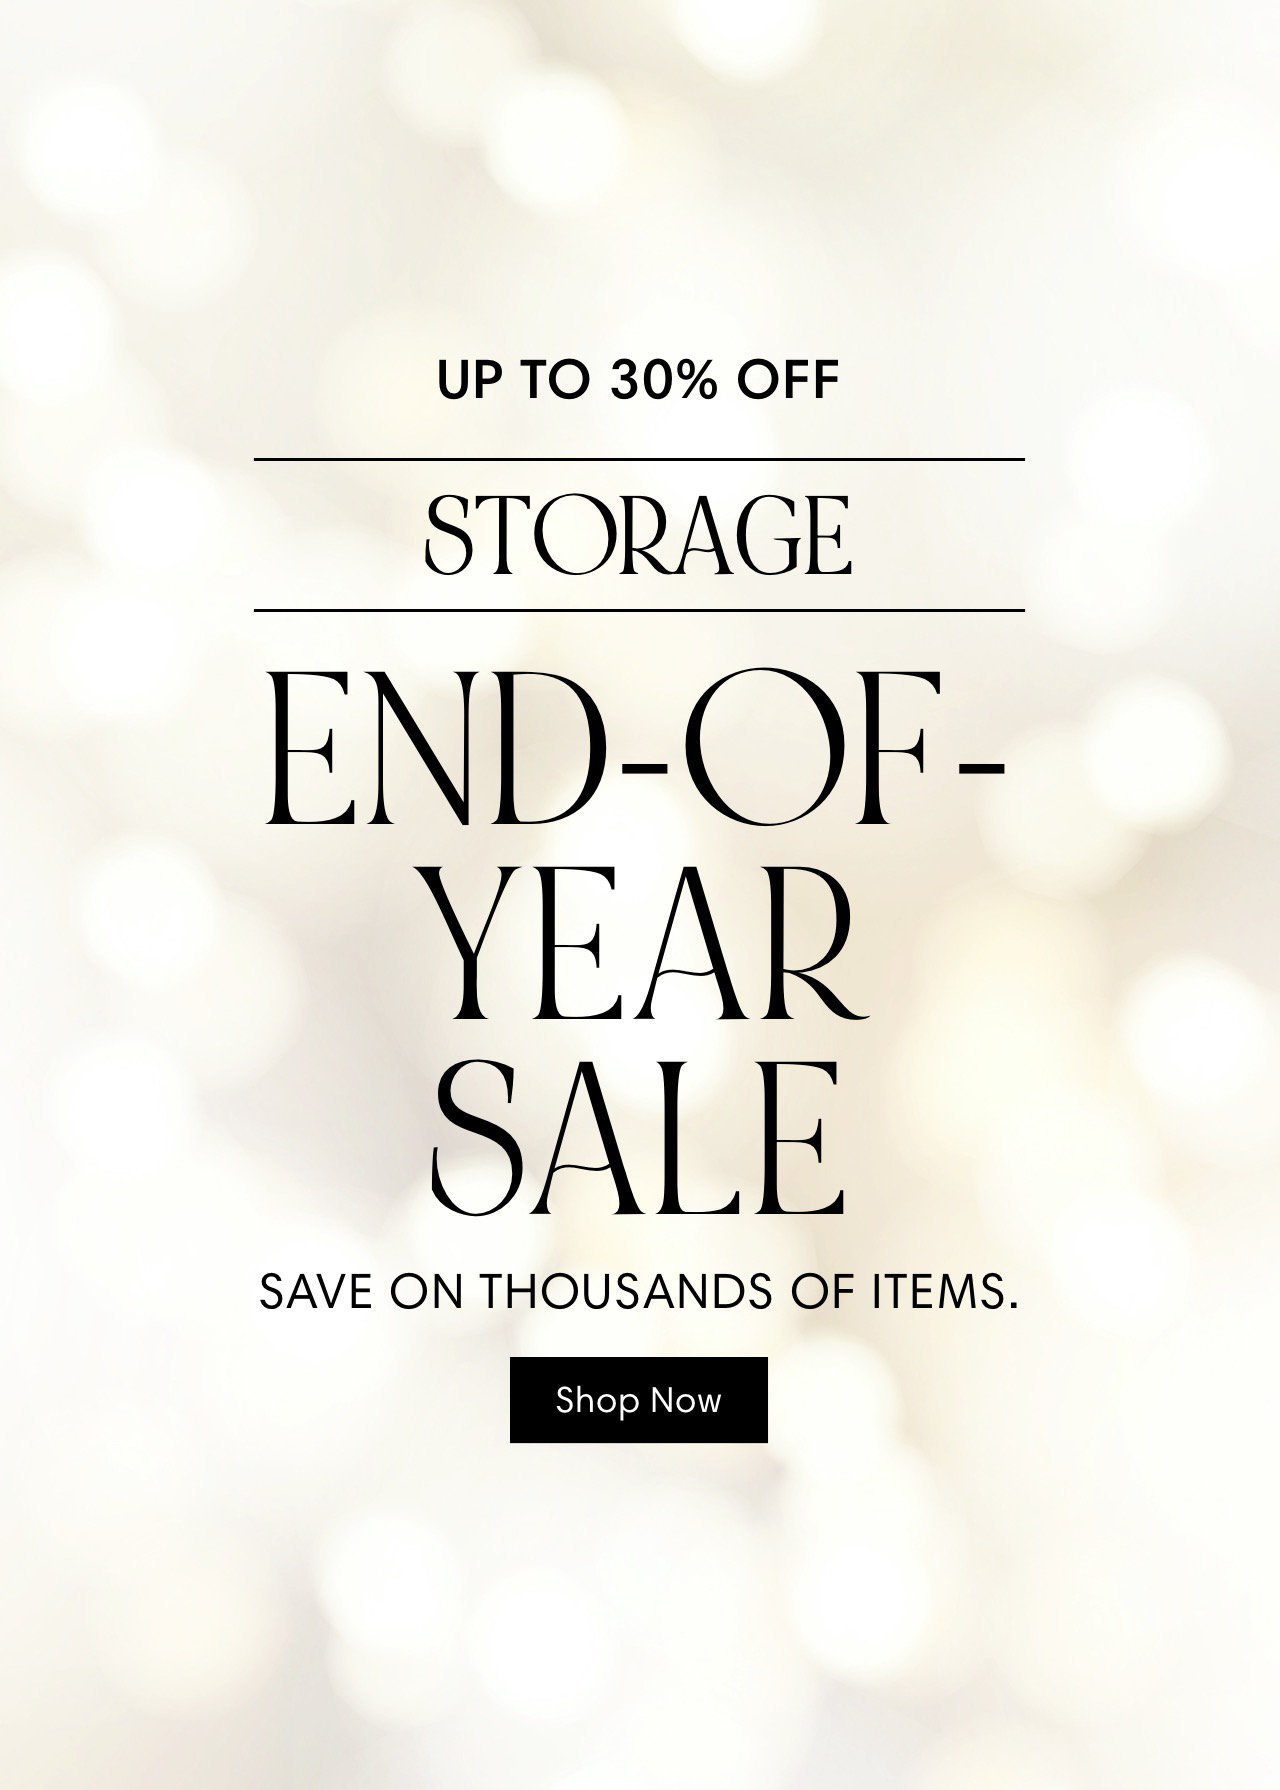 UP TO 30% OFF sTORAGEEE END-OF- YEAR OALE SAVE ON THOUSANDS OF ITEMS. ooooooo 